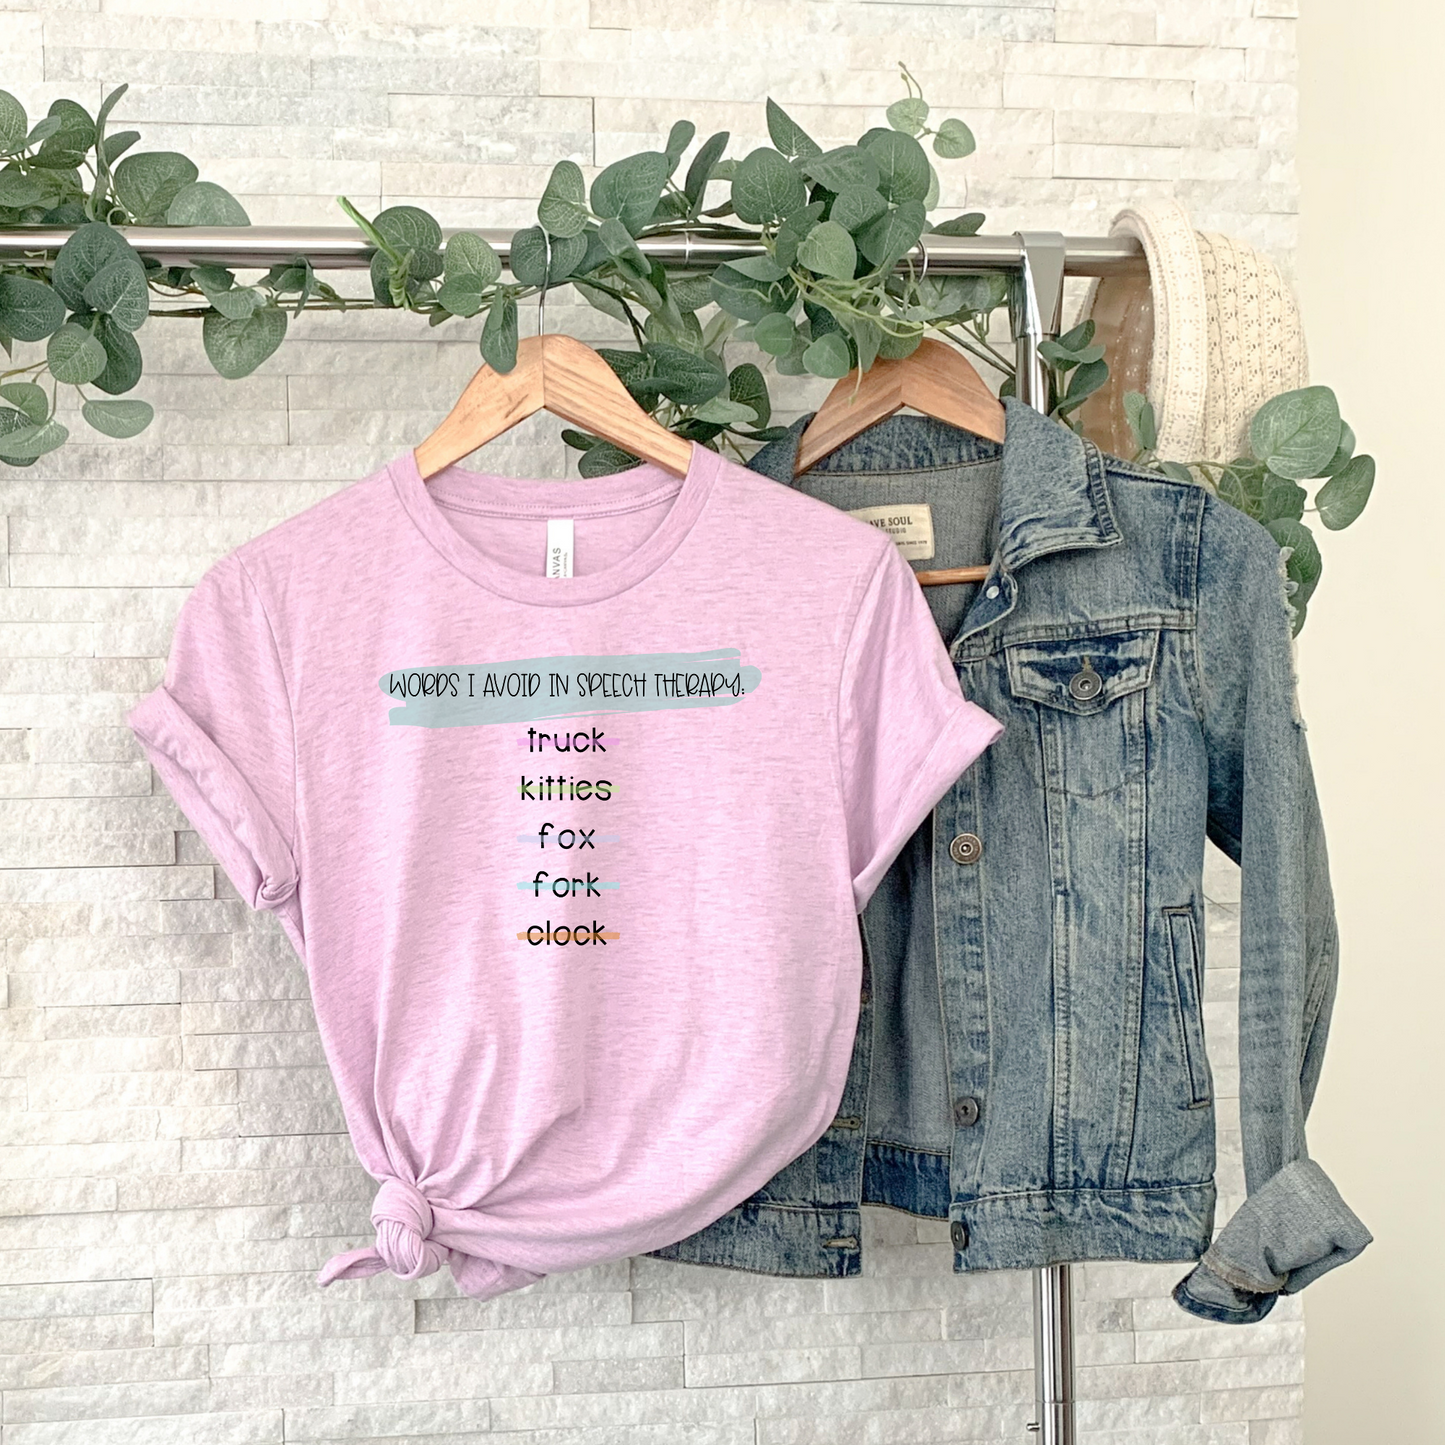 Words I Avoid in Speech Therapy Tee